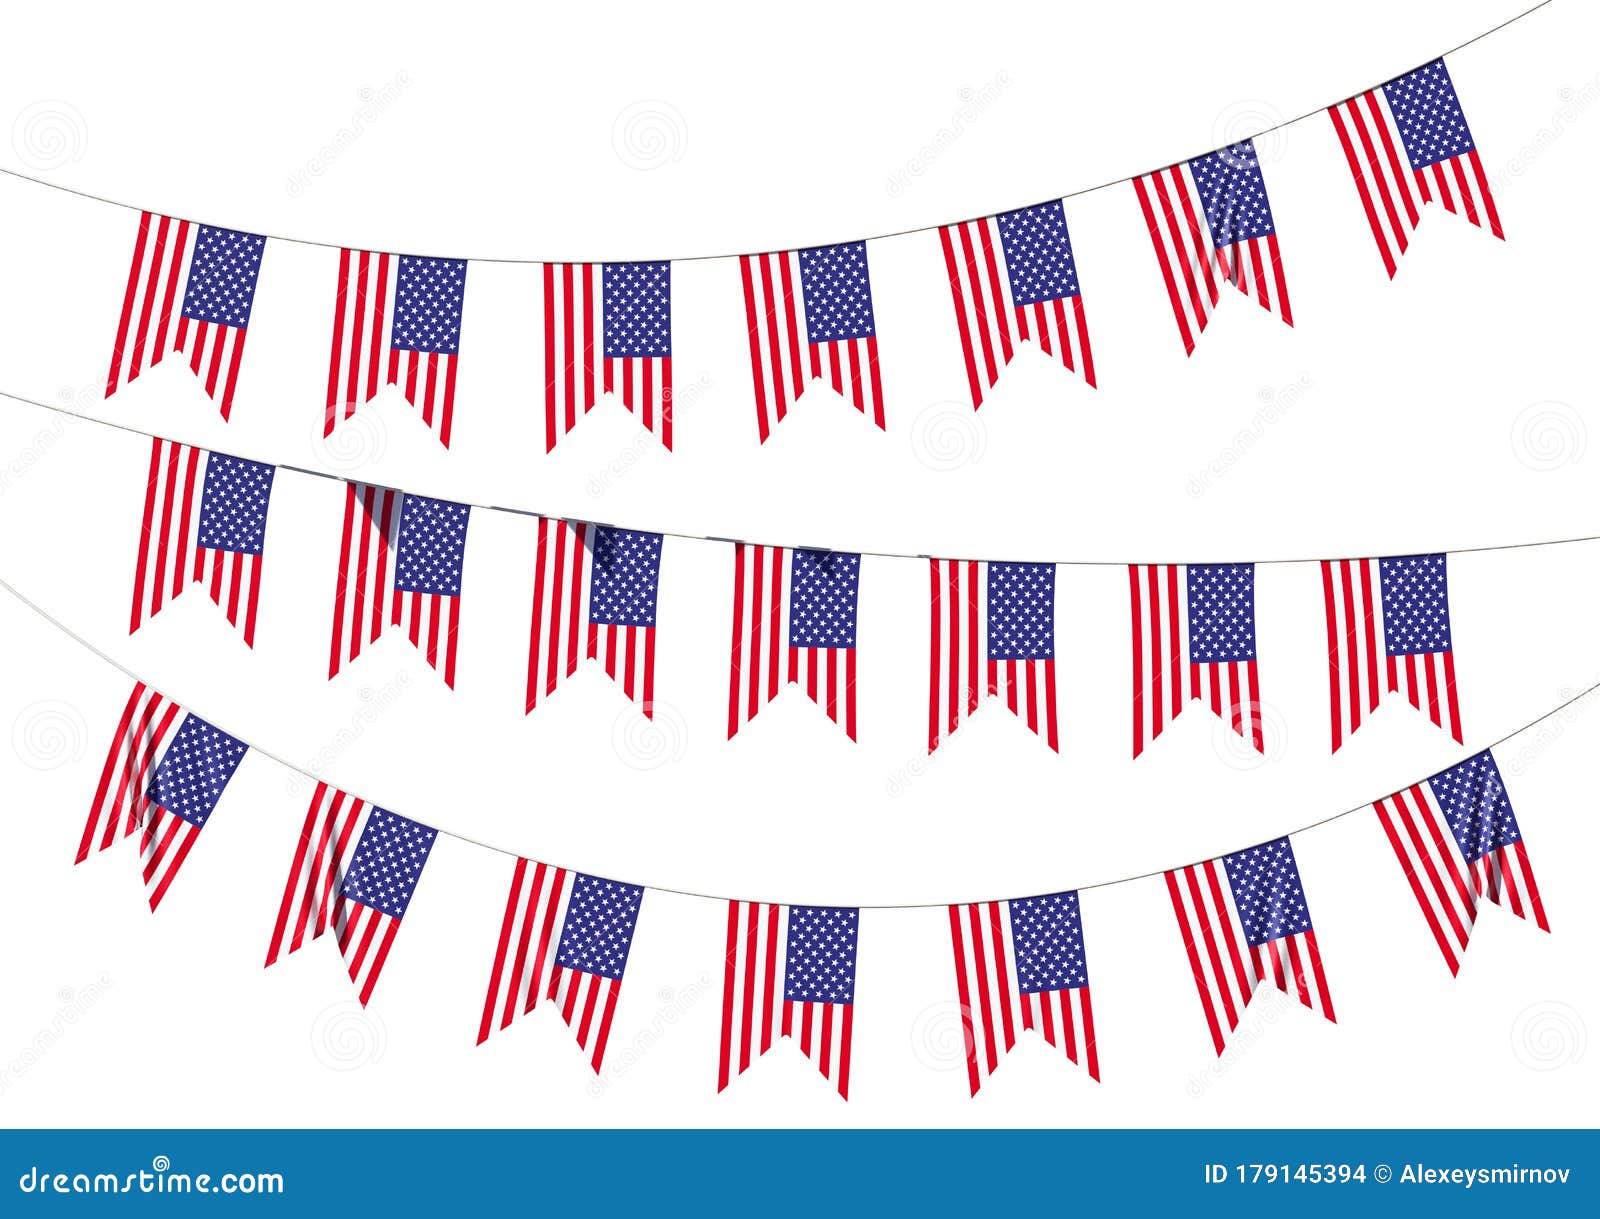 Strings of American Flags Decorative Hanging Bunting Stock Illustration ...